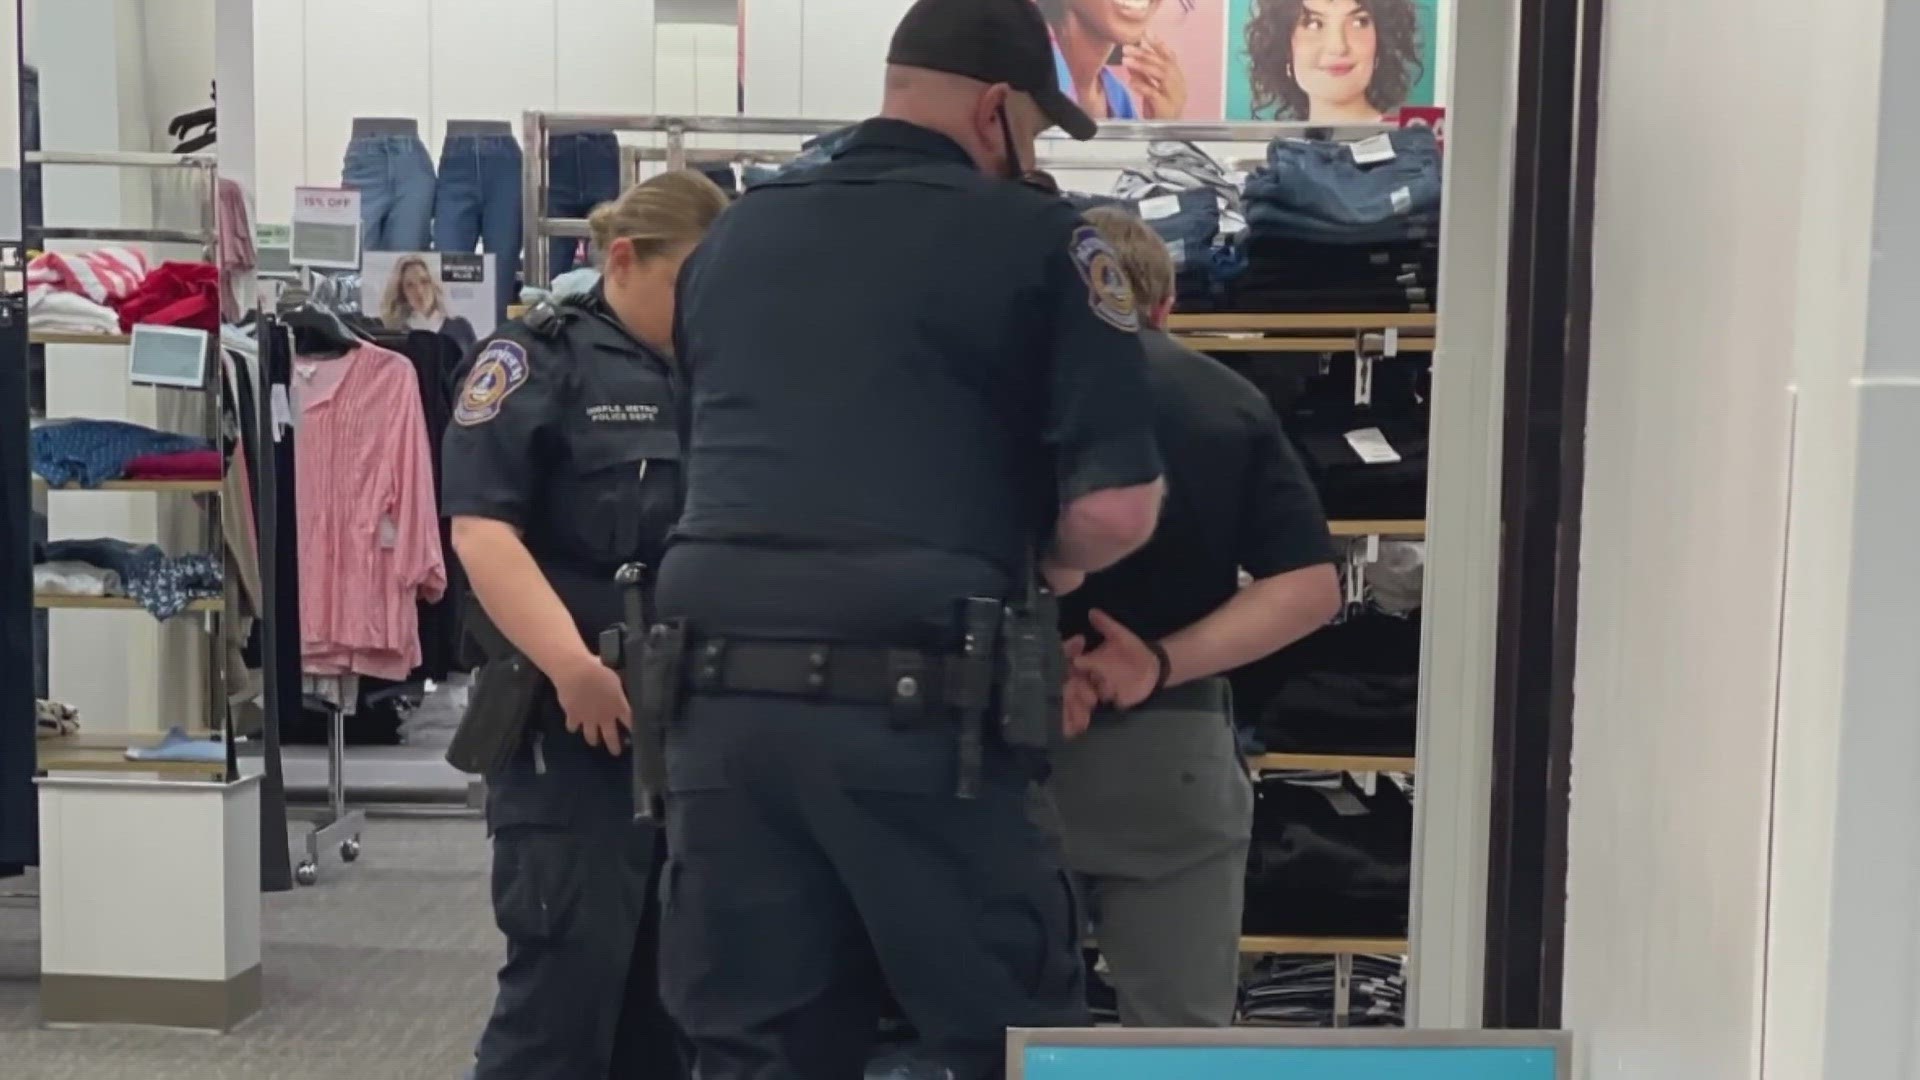 13News reporter John Doran reports from a Kohl's on Southport Road where police say Tanner Vandeman filmed a woman changing in a changing room.